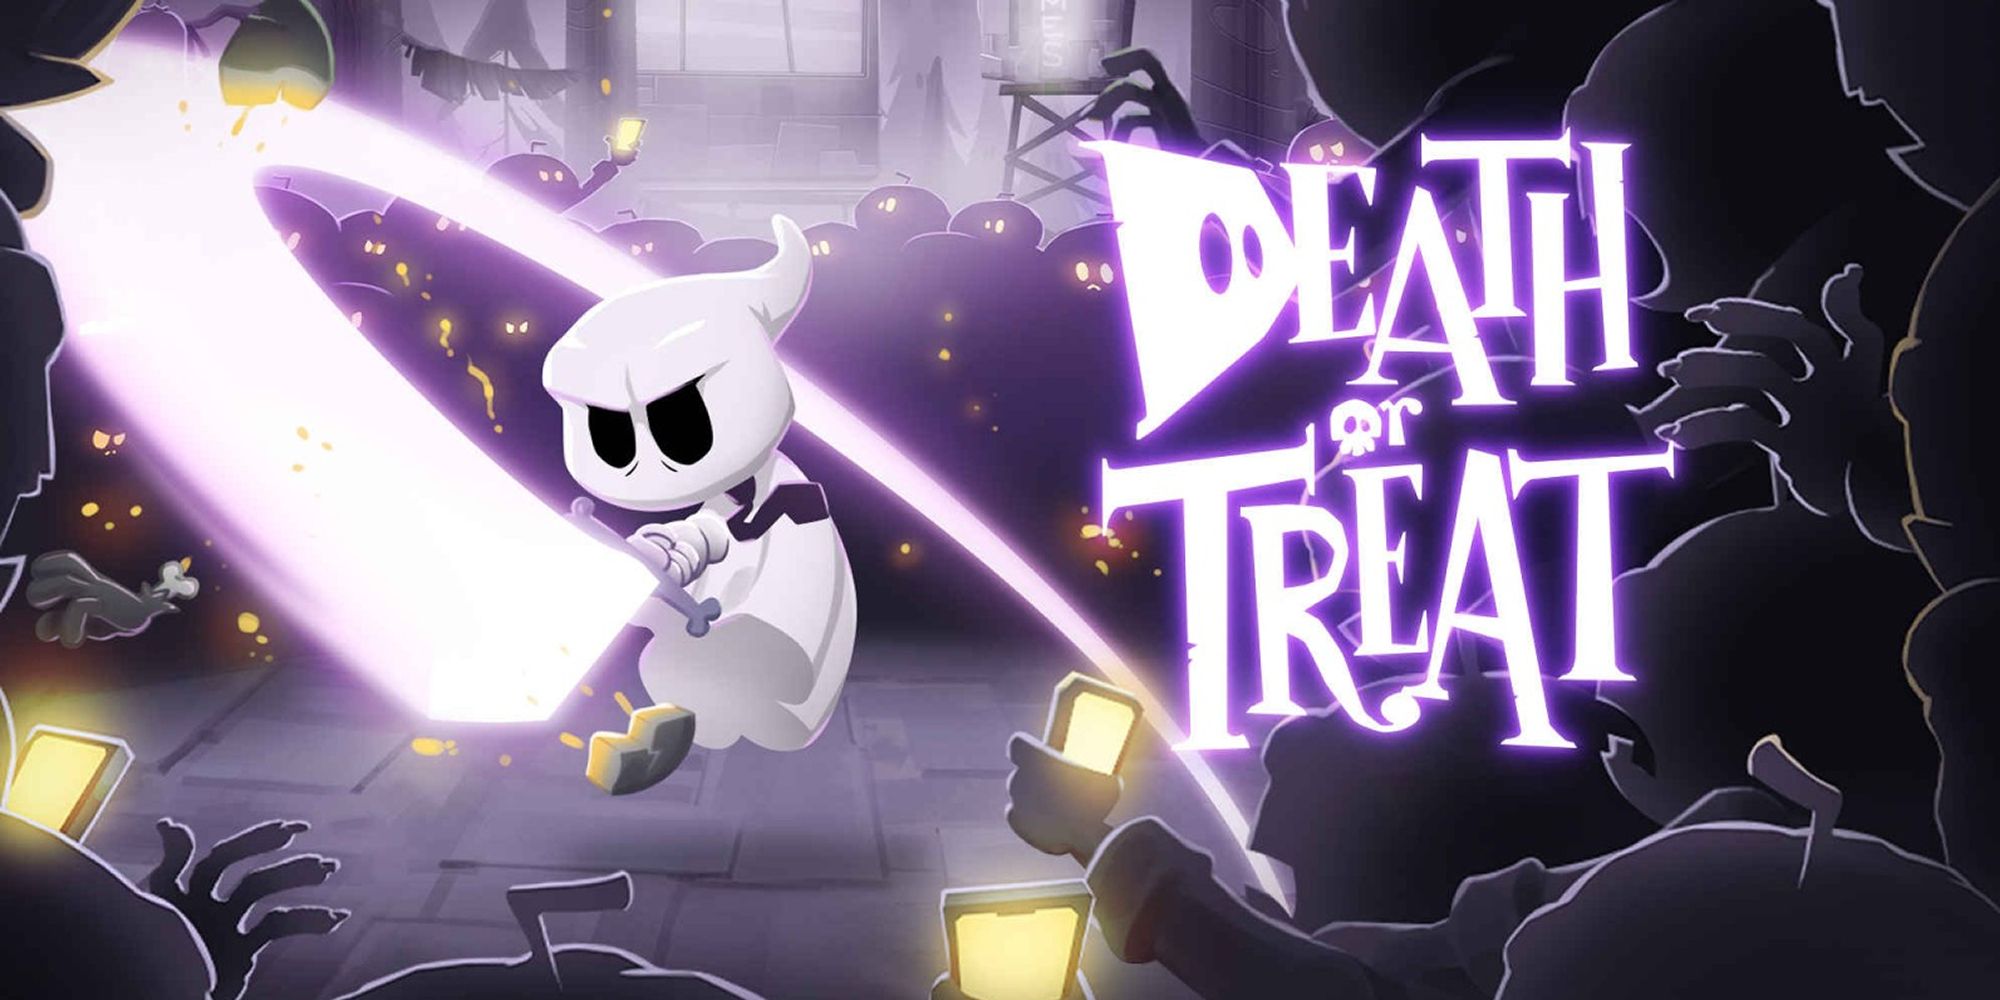 Death Or Treat Title Art Depicting Scary Attacking Enemies